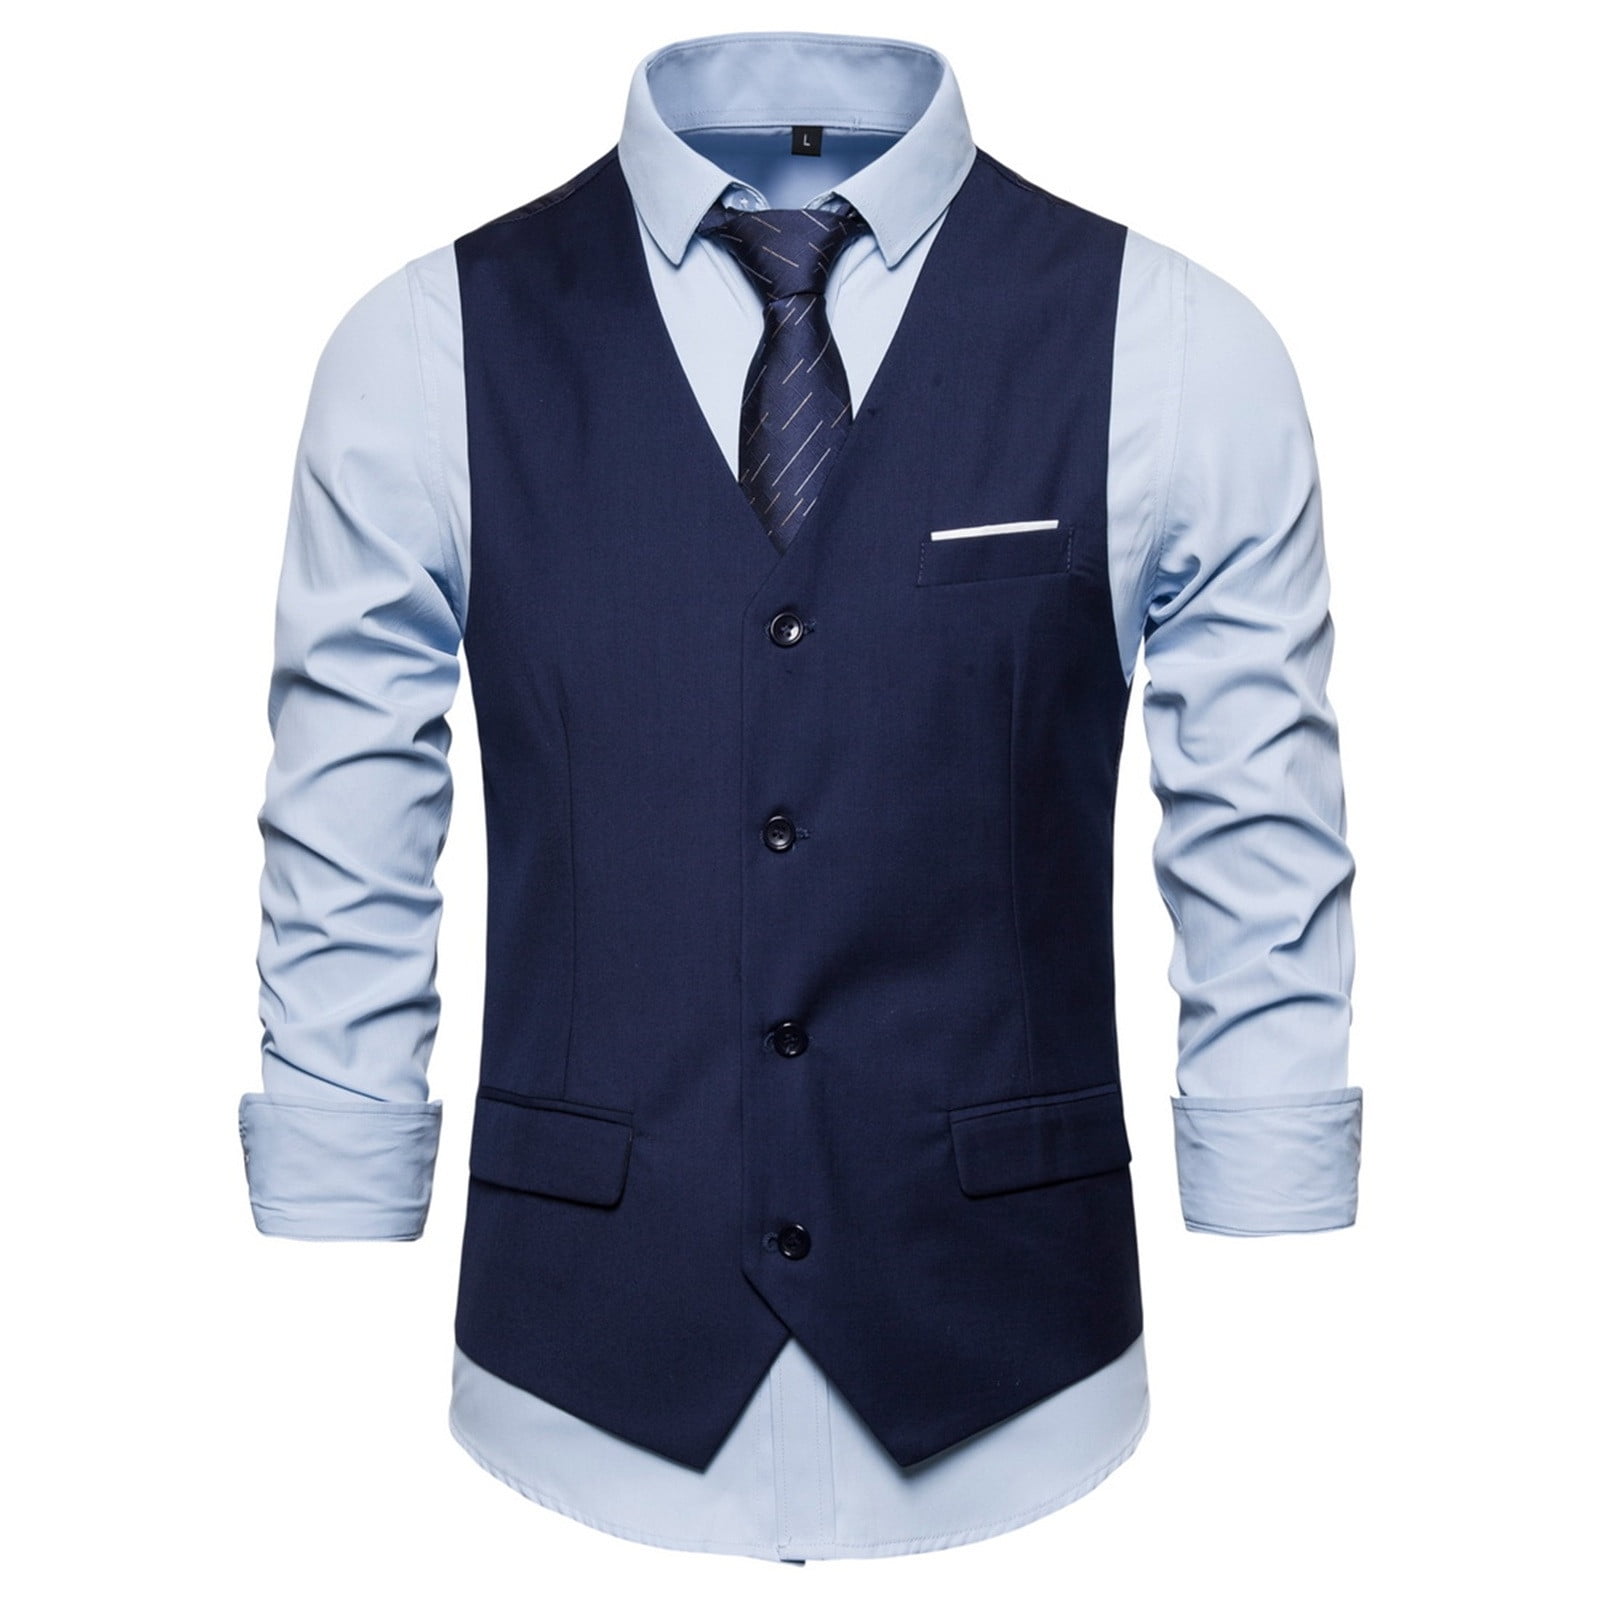 BELLZELY Blazers for Men Big and Tall Clearance Men\'s Spring Spring Formal  Bussiness Tuxedo Suit Waistcoat Vest Jacket Top Coat